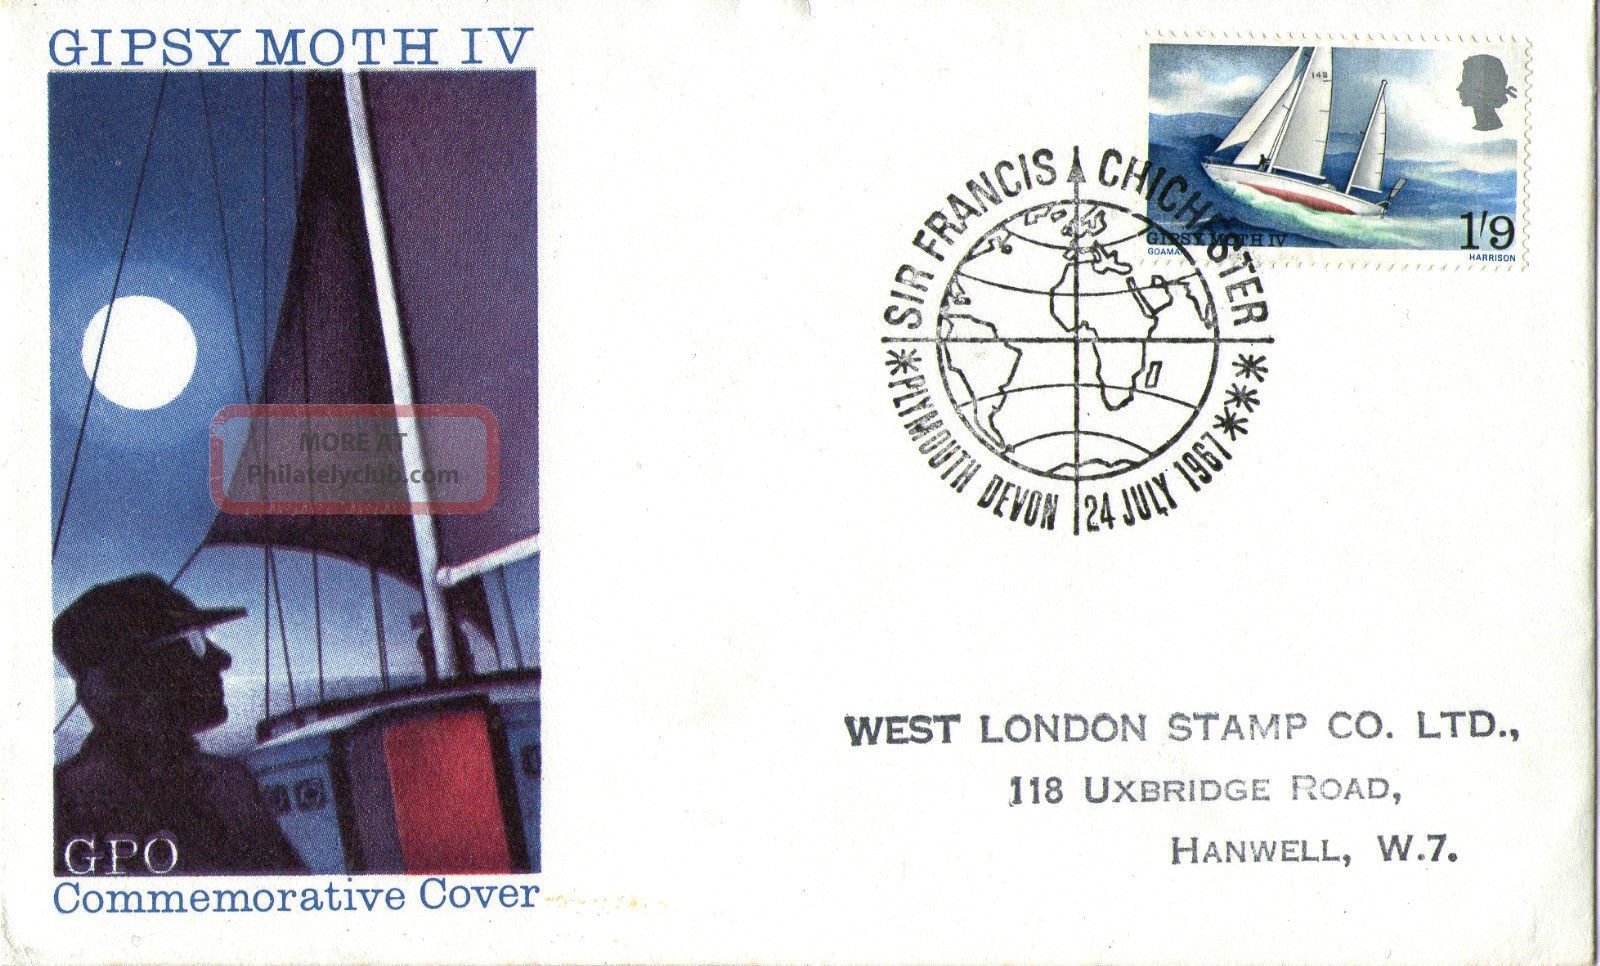 24 July 1967 Sir Francis Chichester Gpo First Day Cover Plymouth Devon Shs Transportation photo